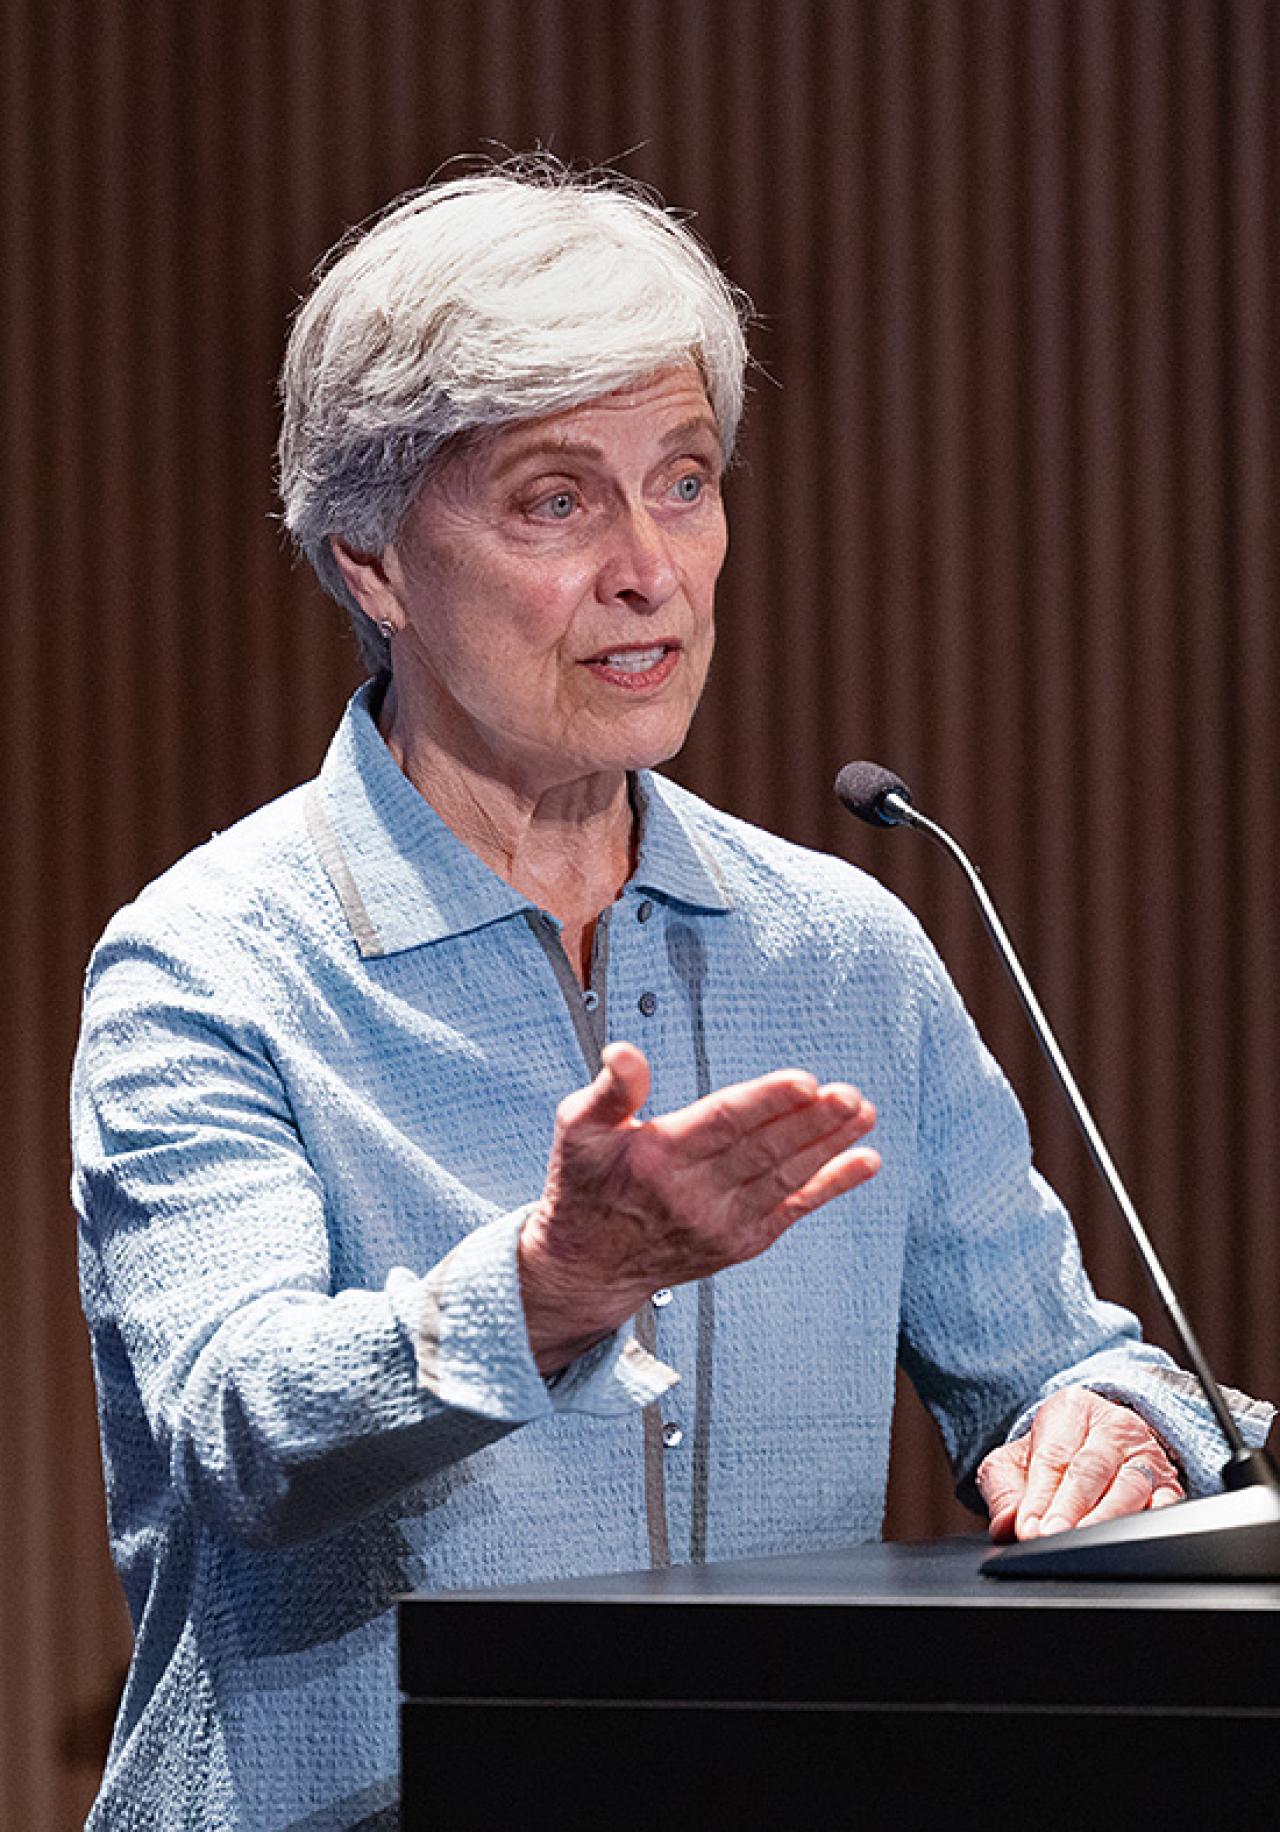 A woman with gray hair speaks at a podium